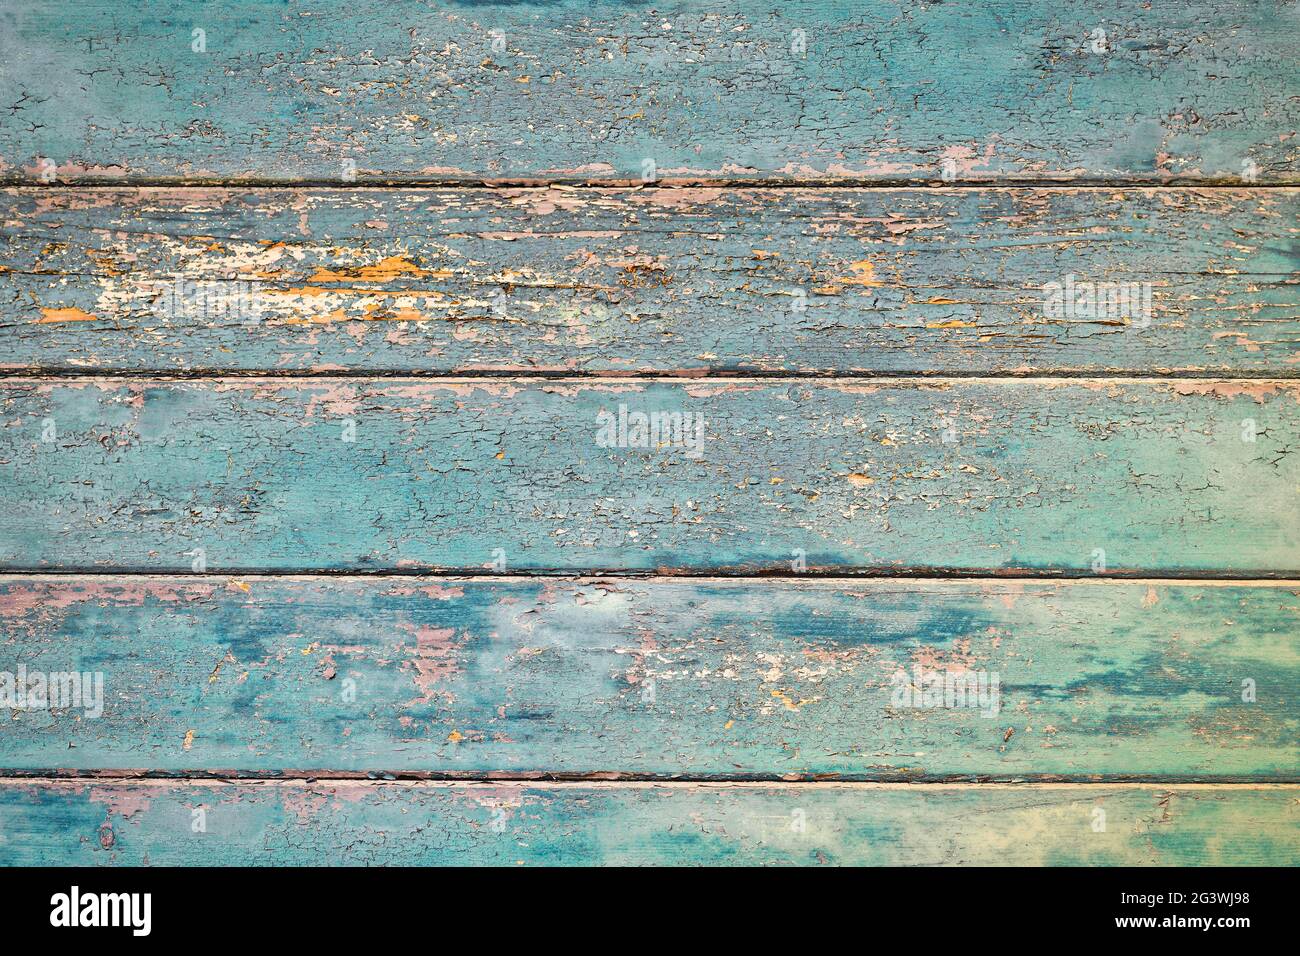 Grunge background with wooden dark teal blue colored old weathered planks with chipped paint Stock Photo